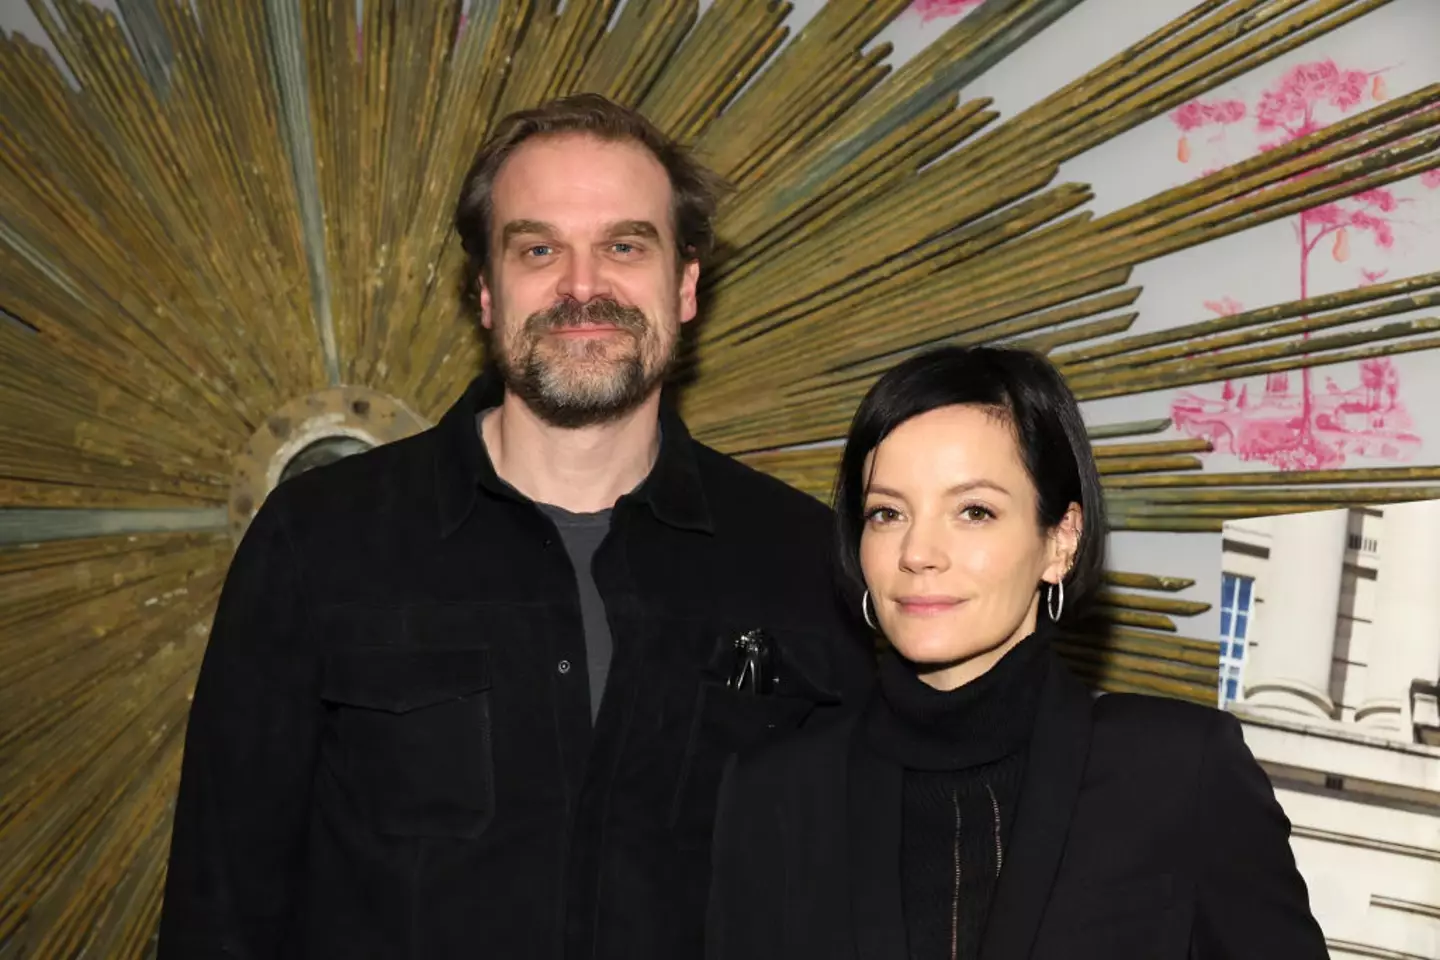 Lily Allen shared David Harbour's response to her OnlyFans decision. (Dia Dipasupil/Getty Images)